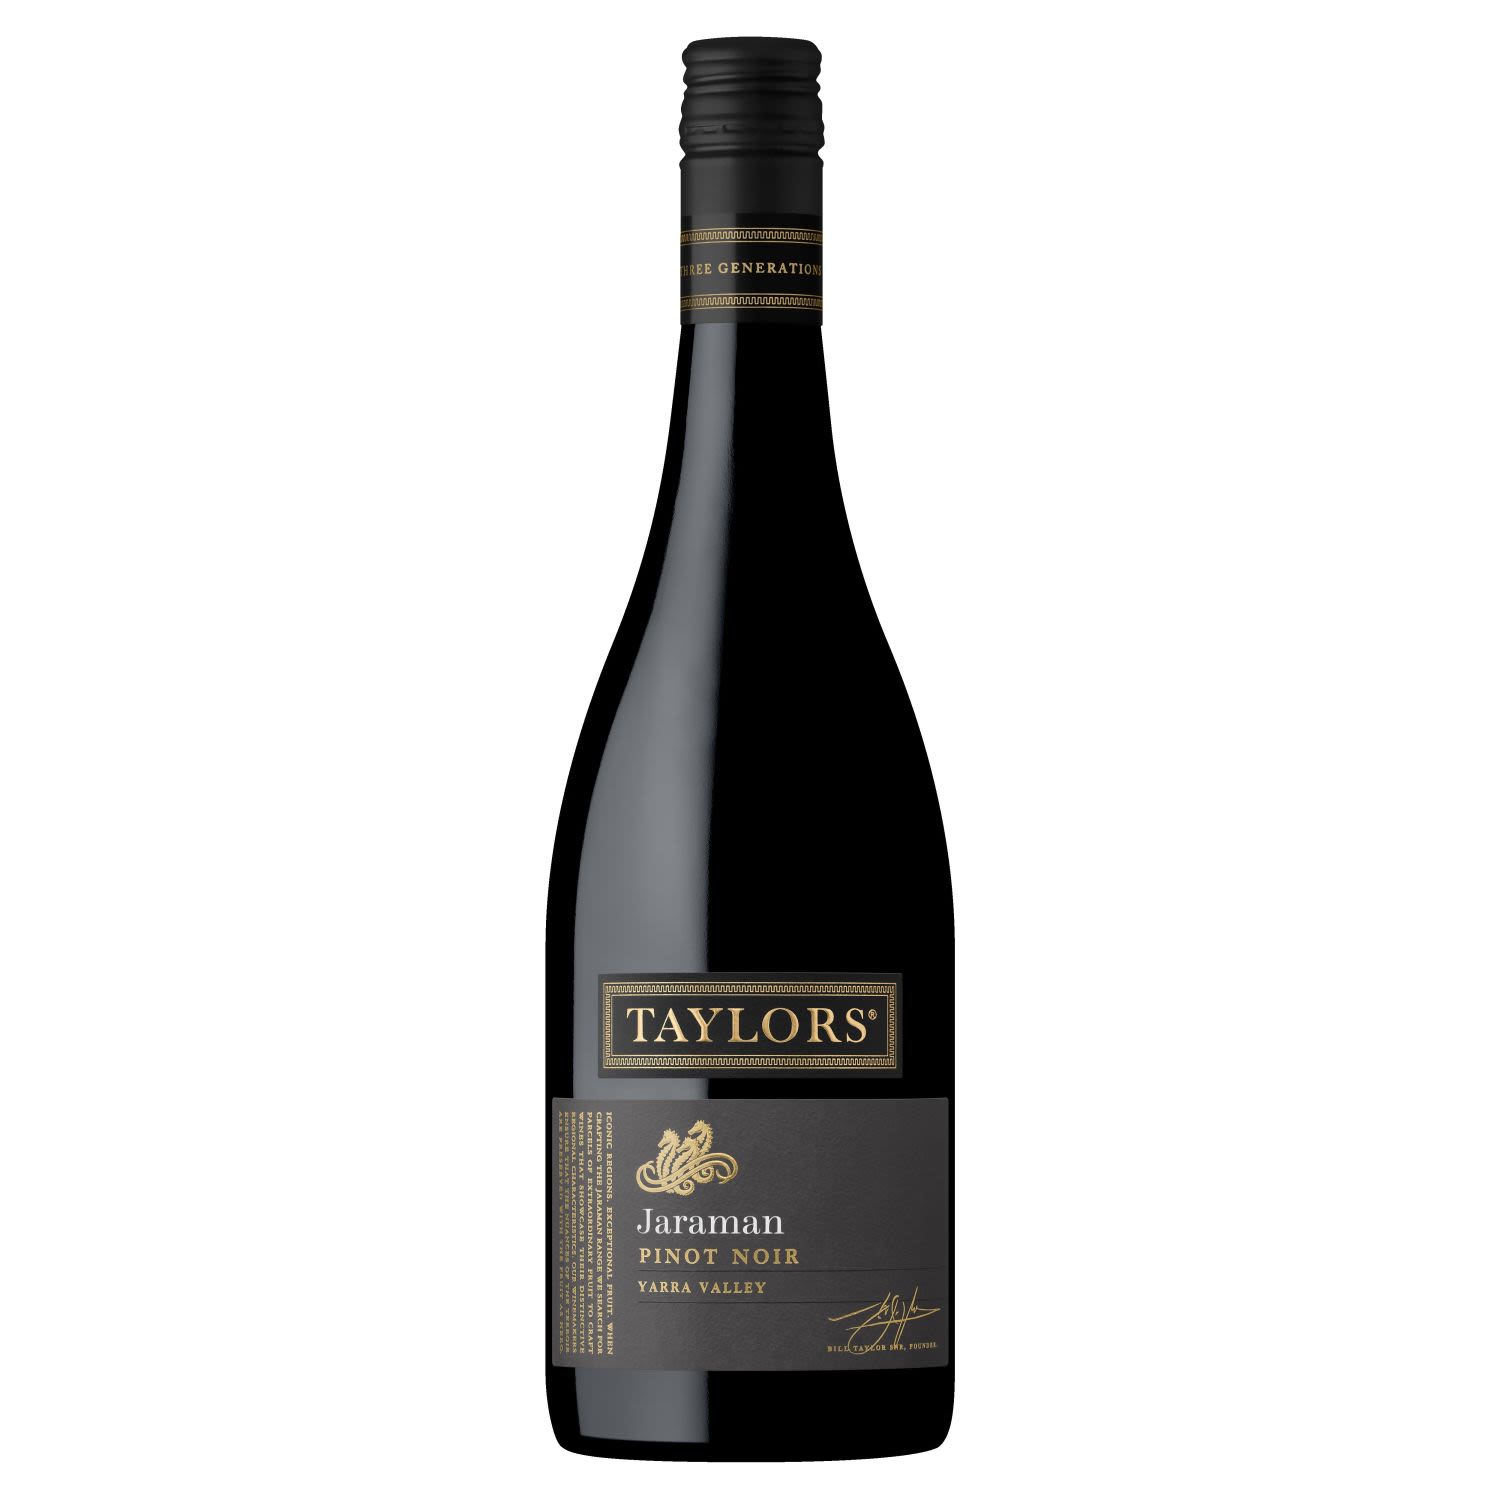 Well structured and balanced with smooth tannins, full of juicy red fruit and violet characters<br /> <br />Alcohol Volume: 14.50%<br /><br />Pack Format: Bottle<br /><br />Standard Drinks: 8.3</br /><br />Pack Type: Bottle<br /><br />Country of Origin: Australia<br /><br />Region: Yarra Valley<br /><br />Vintage: Non Vintage<br />